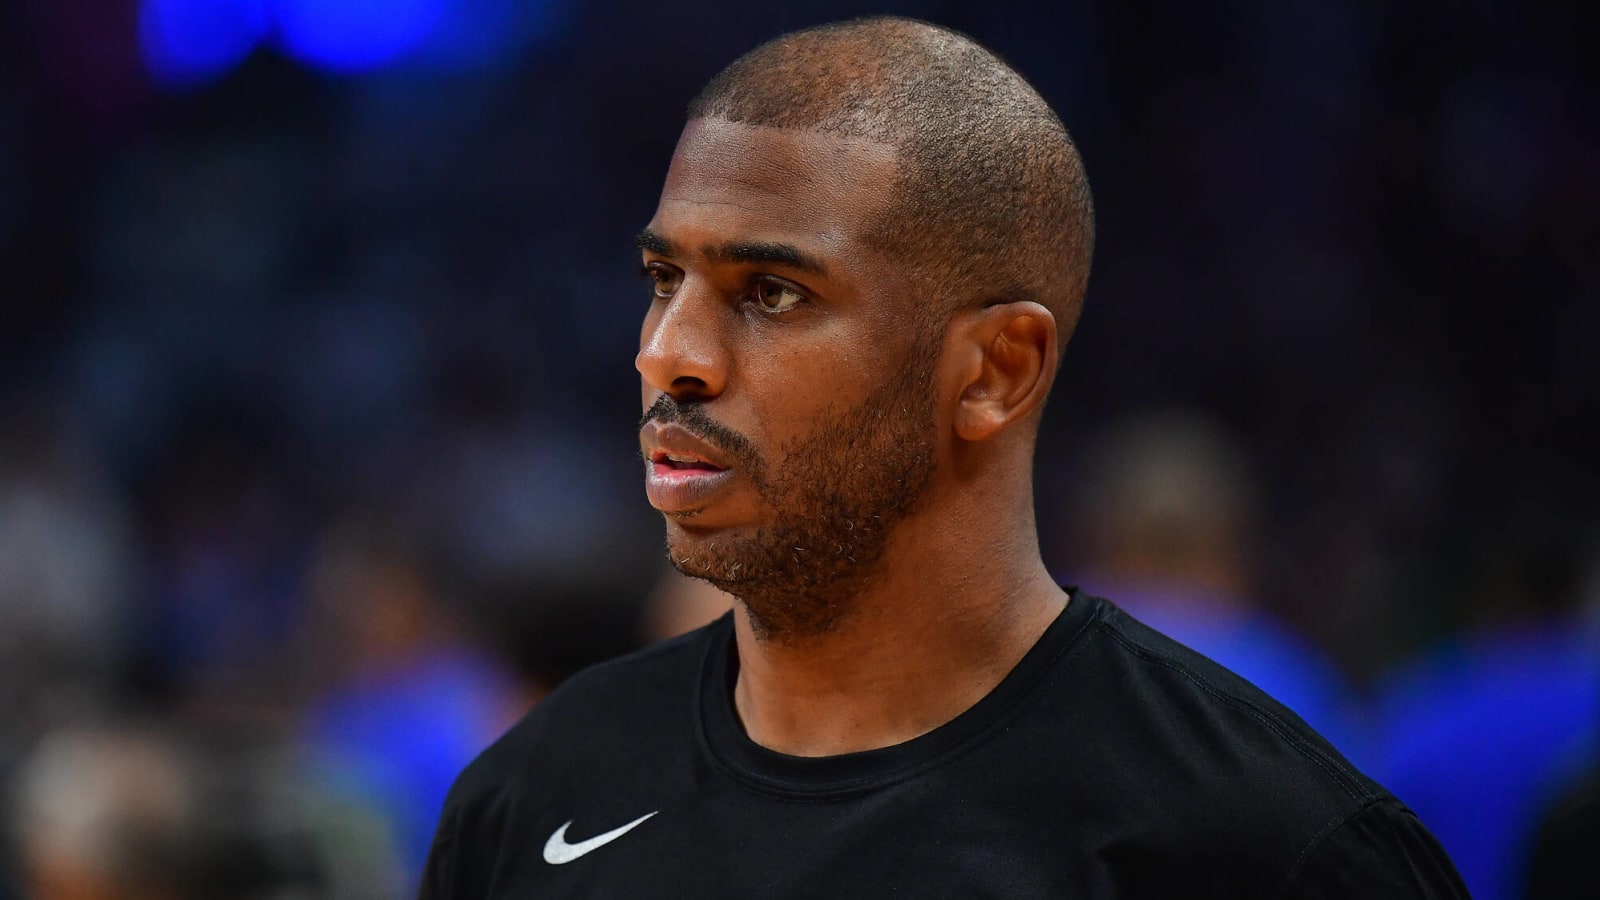 CP3: Lack of title negatively impacting daughter at school